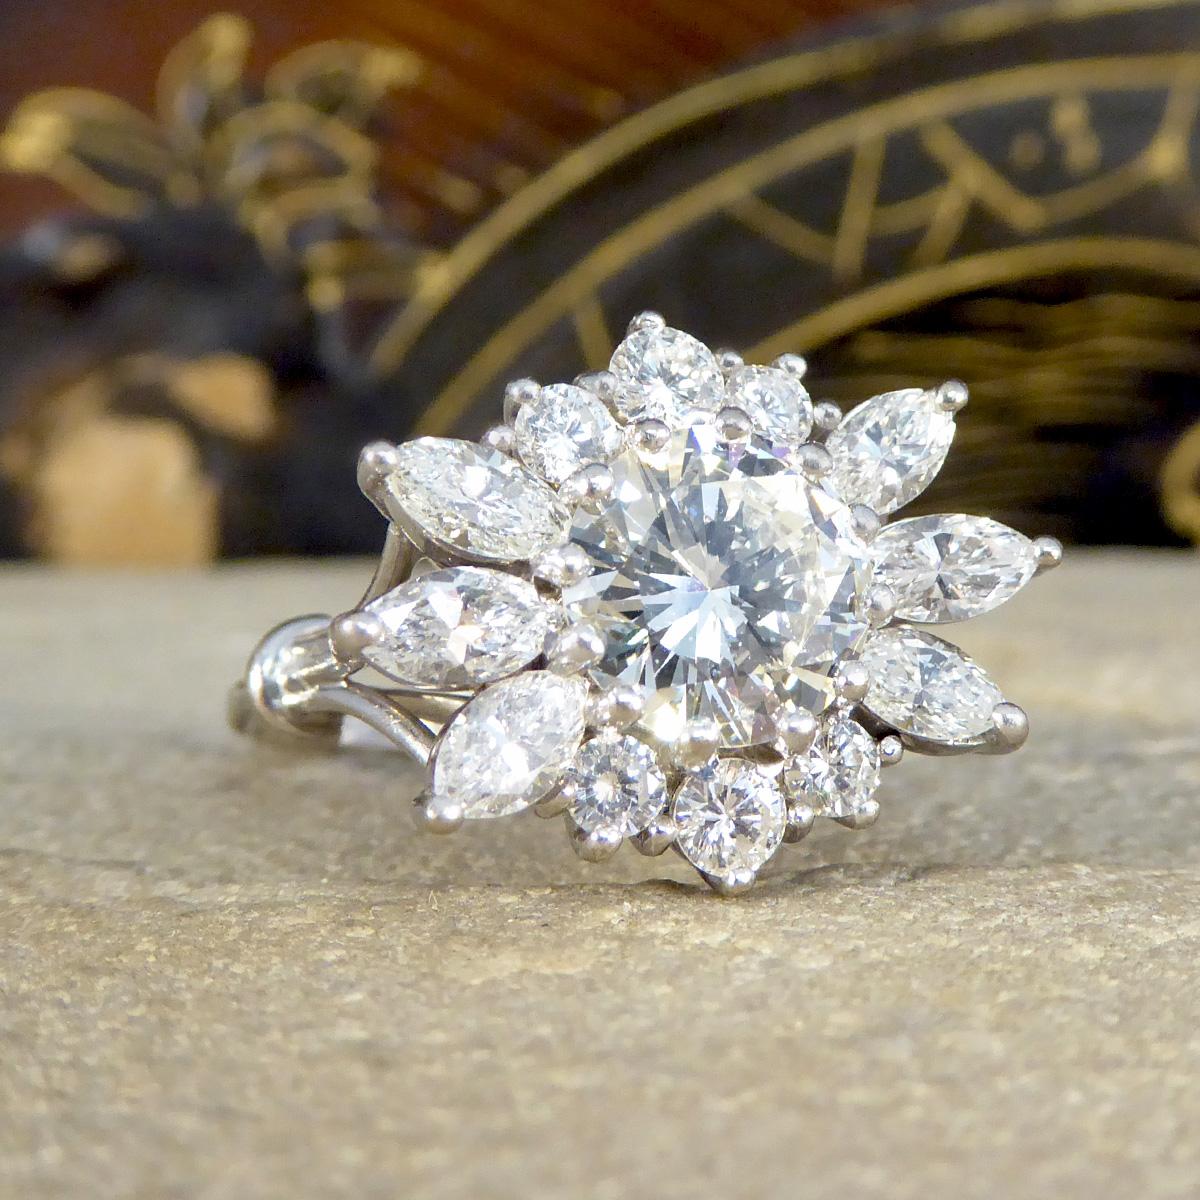 This exquisite 3.28ct Diamond flower burst cluster ring is a magnificent display of craftsmanship and elegance, set in luxurious 18ct white gold. At the centre of this breathtaking piece lies a captivating 1.98ct brilliant cut diamond, chosen for